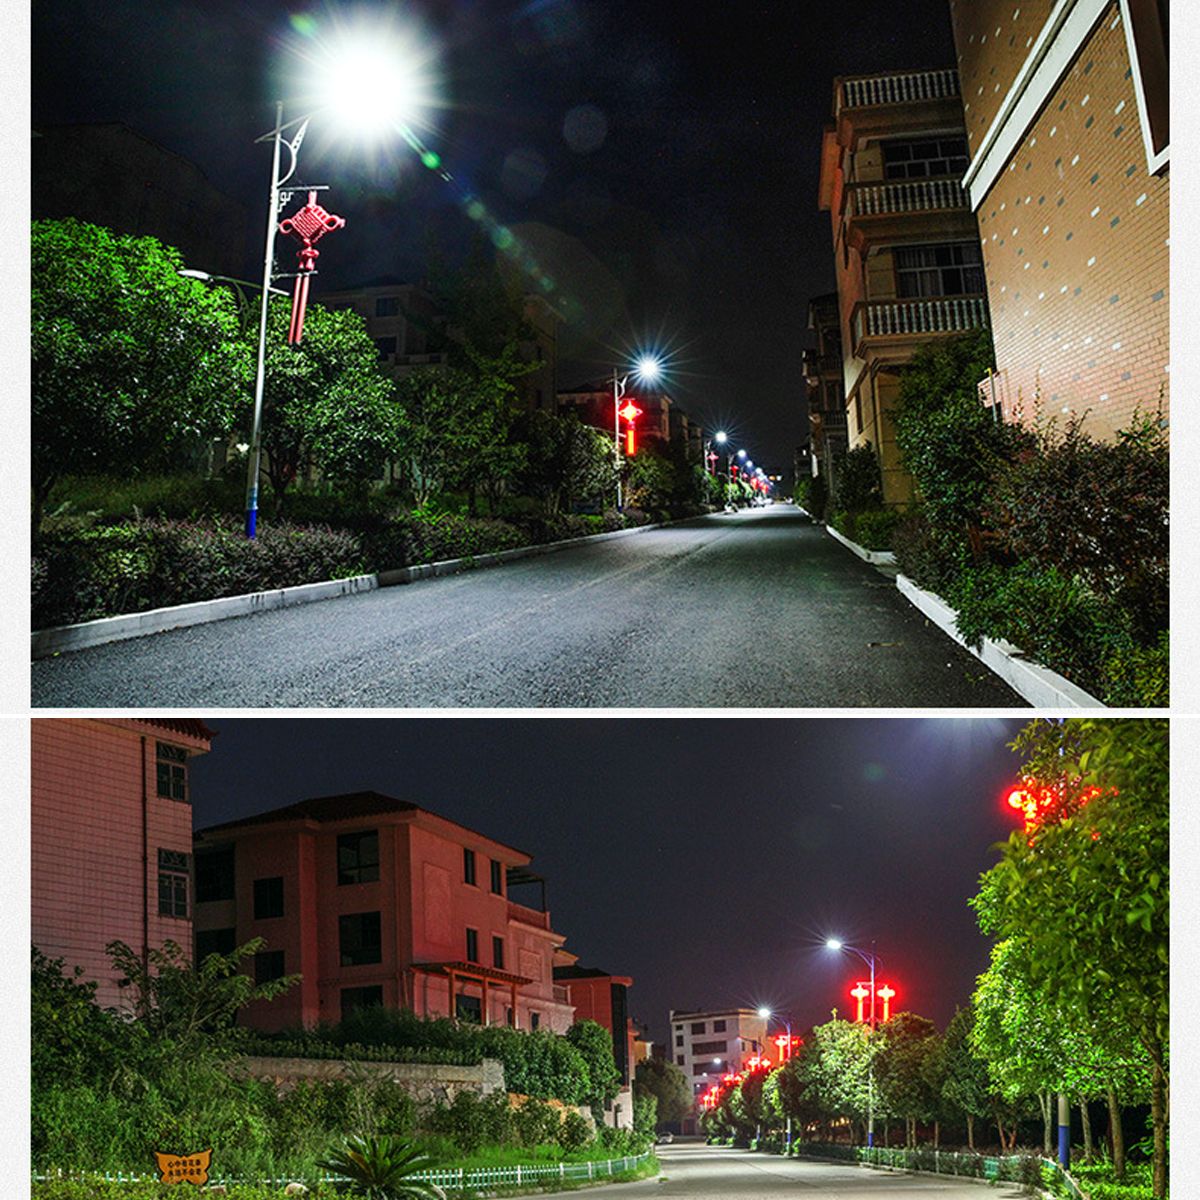 250450800W-Solar-LED-Cool-White-Street-Light-Waterproof-Outdoor-Lamp-w-Remote-1758789